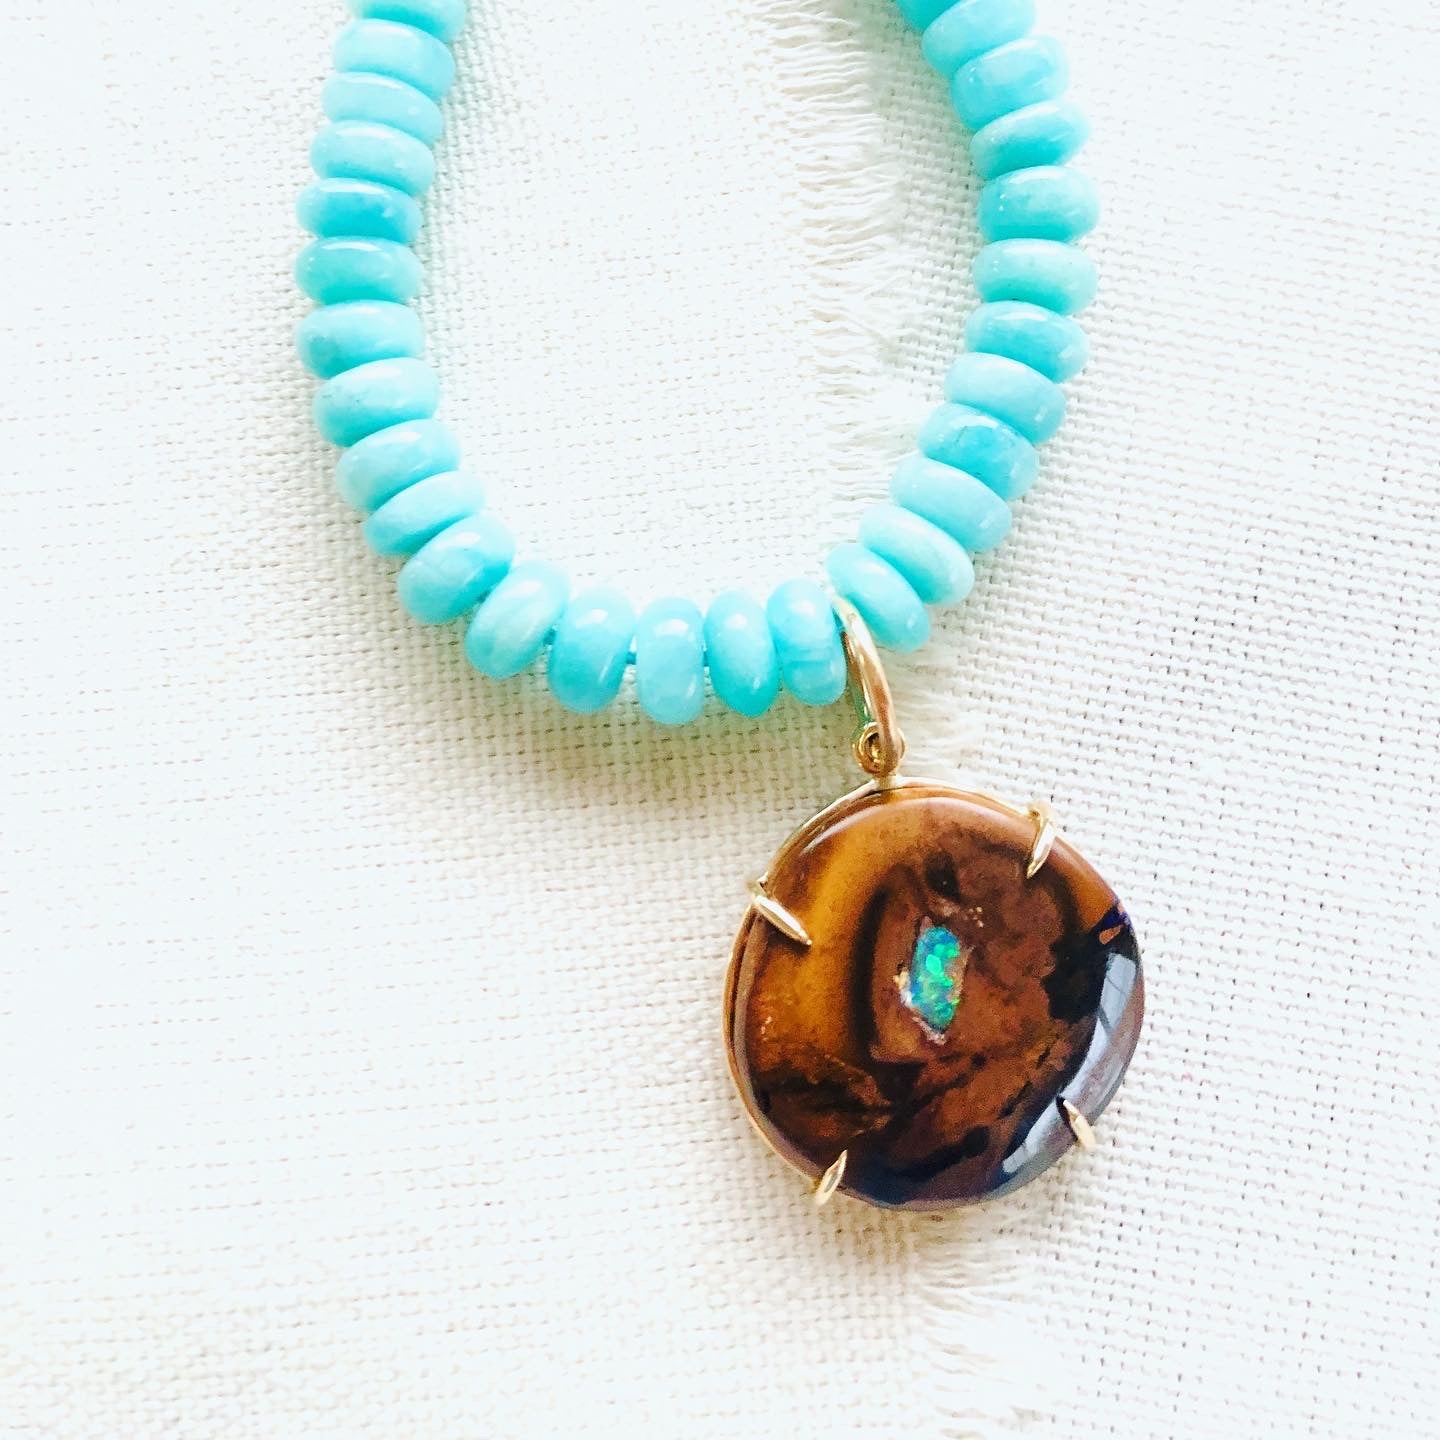 This gorgeous gold necklace is made from Yowah Nut and comes from Australian. The Yowah Nut pendant is strung on a beautiful strand of turquoise colored Amazonite beads and finished with a 14kt gold clasp.